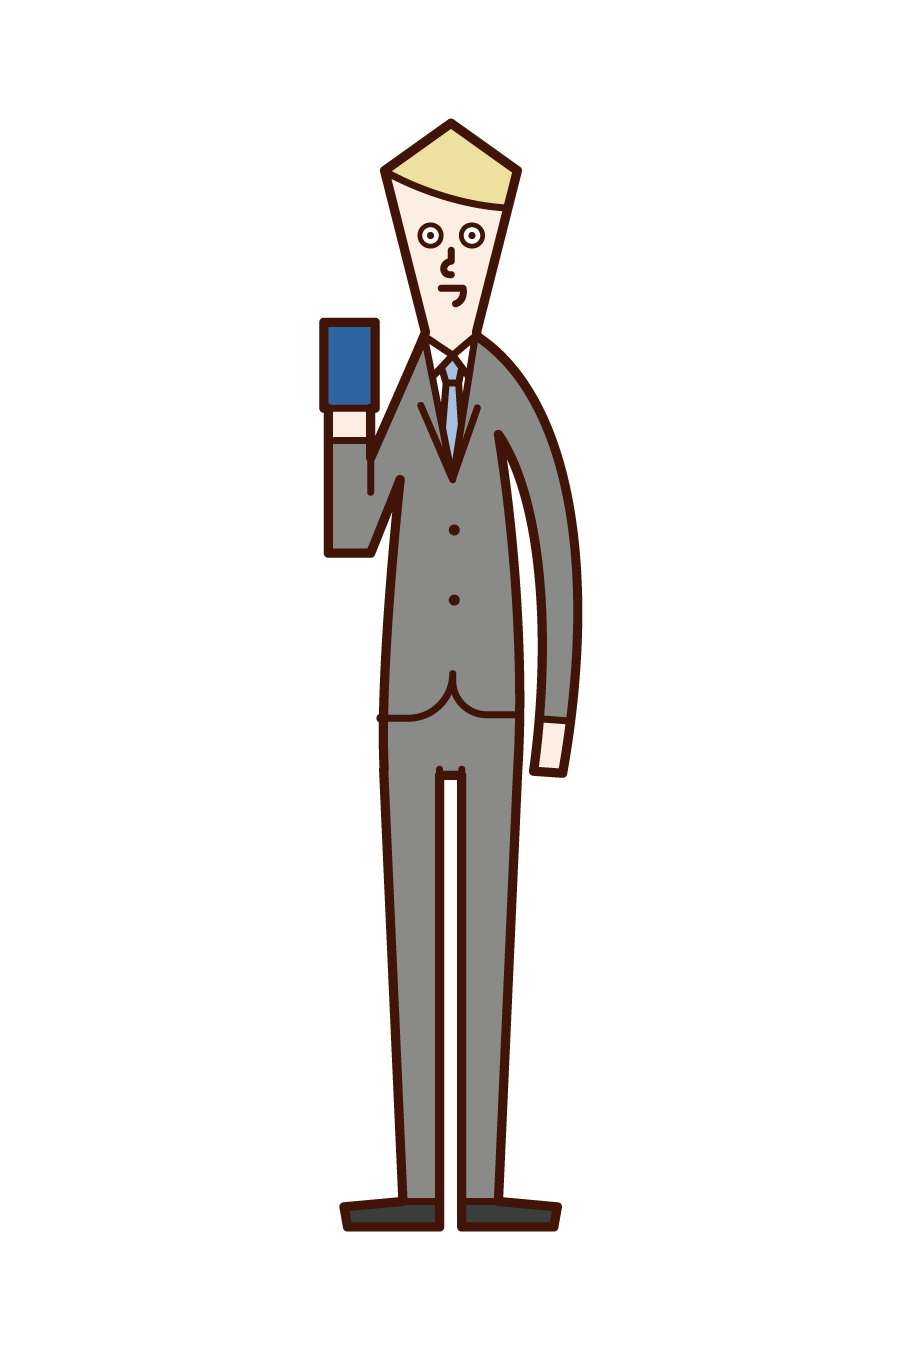 Illustration of a man with a smartphone or card